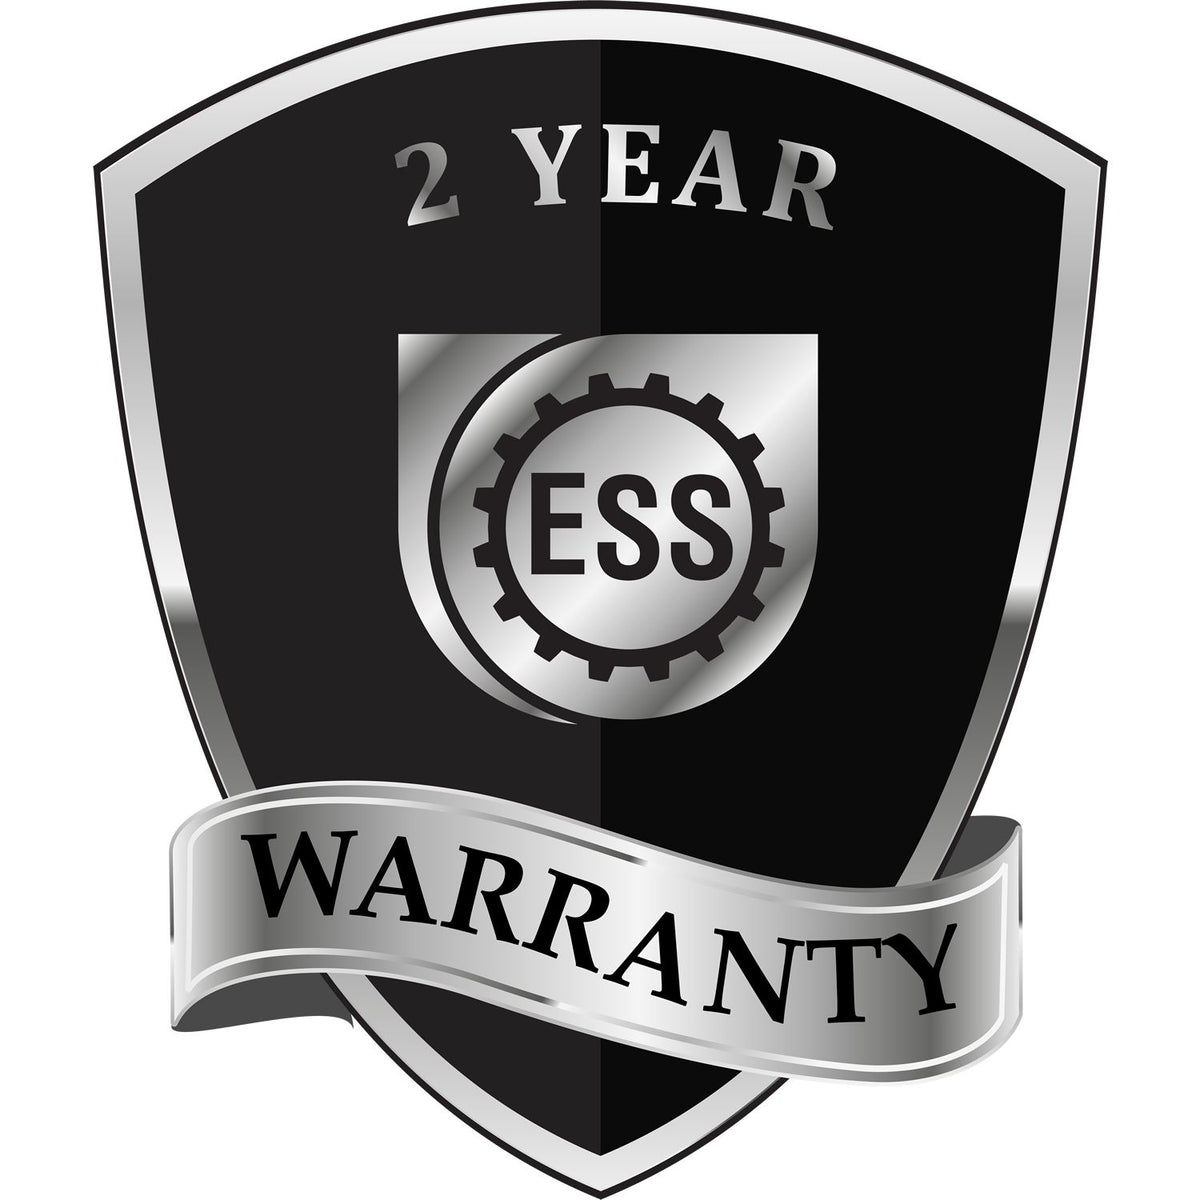 A black and silver badge or emblem showing warranty information for the Gift Guam Architect Seal